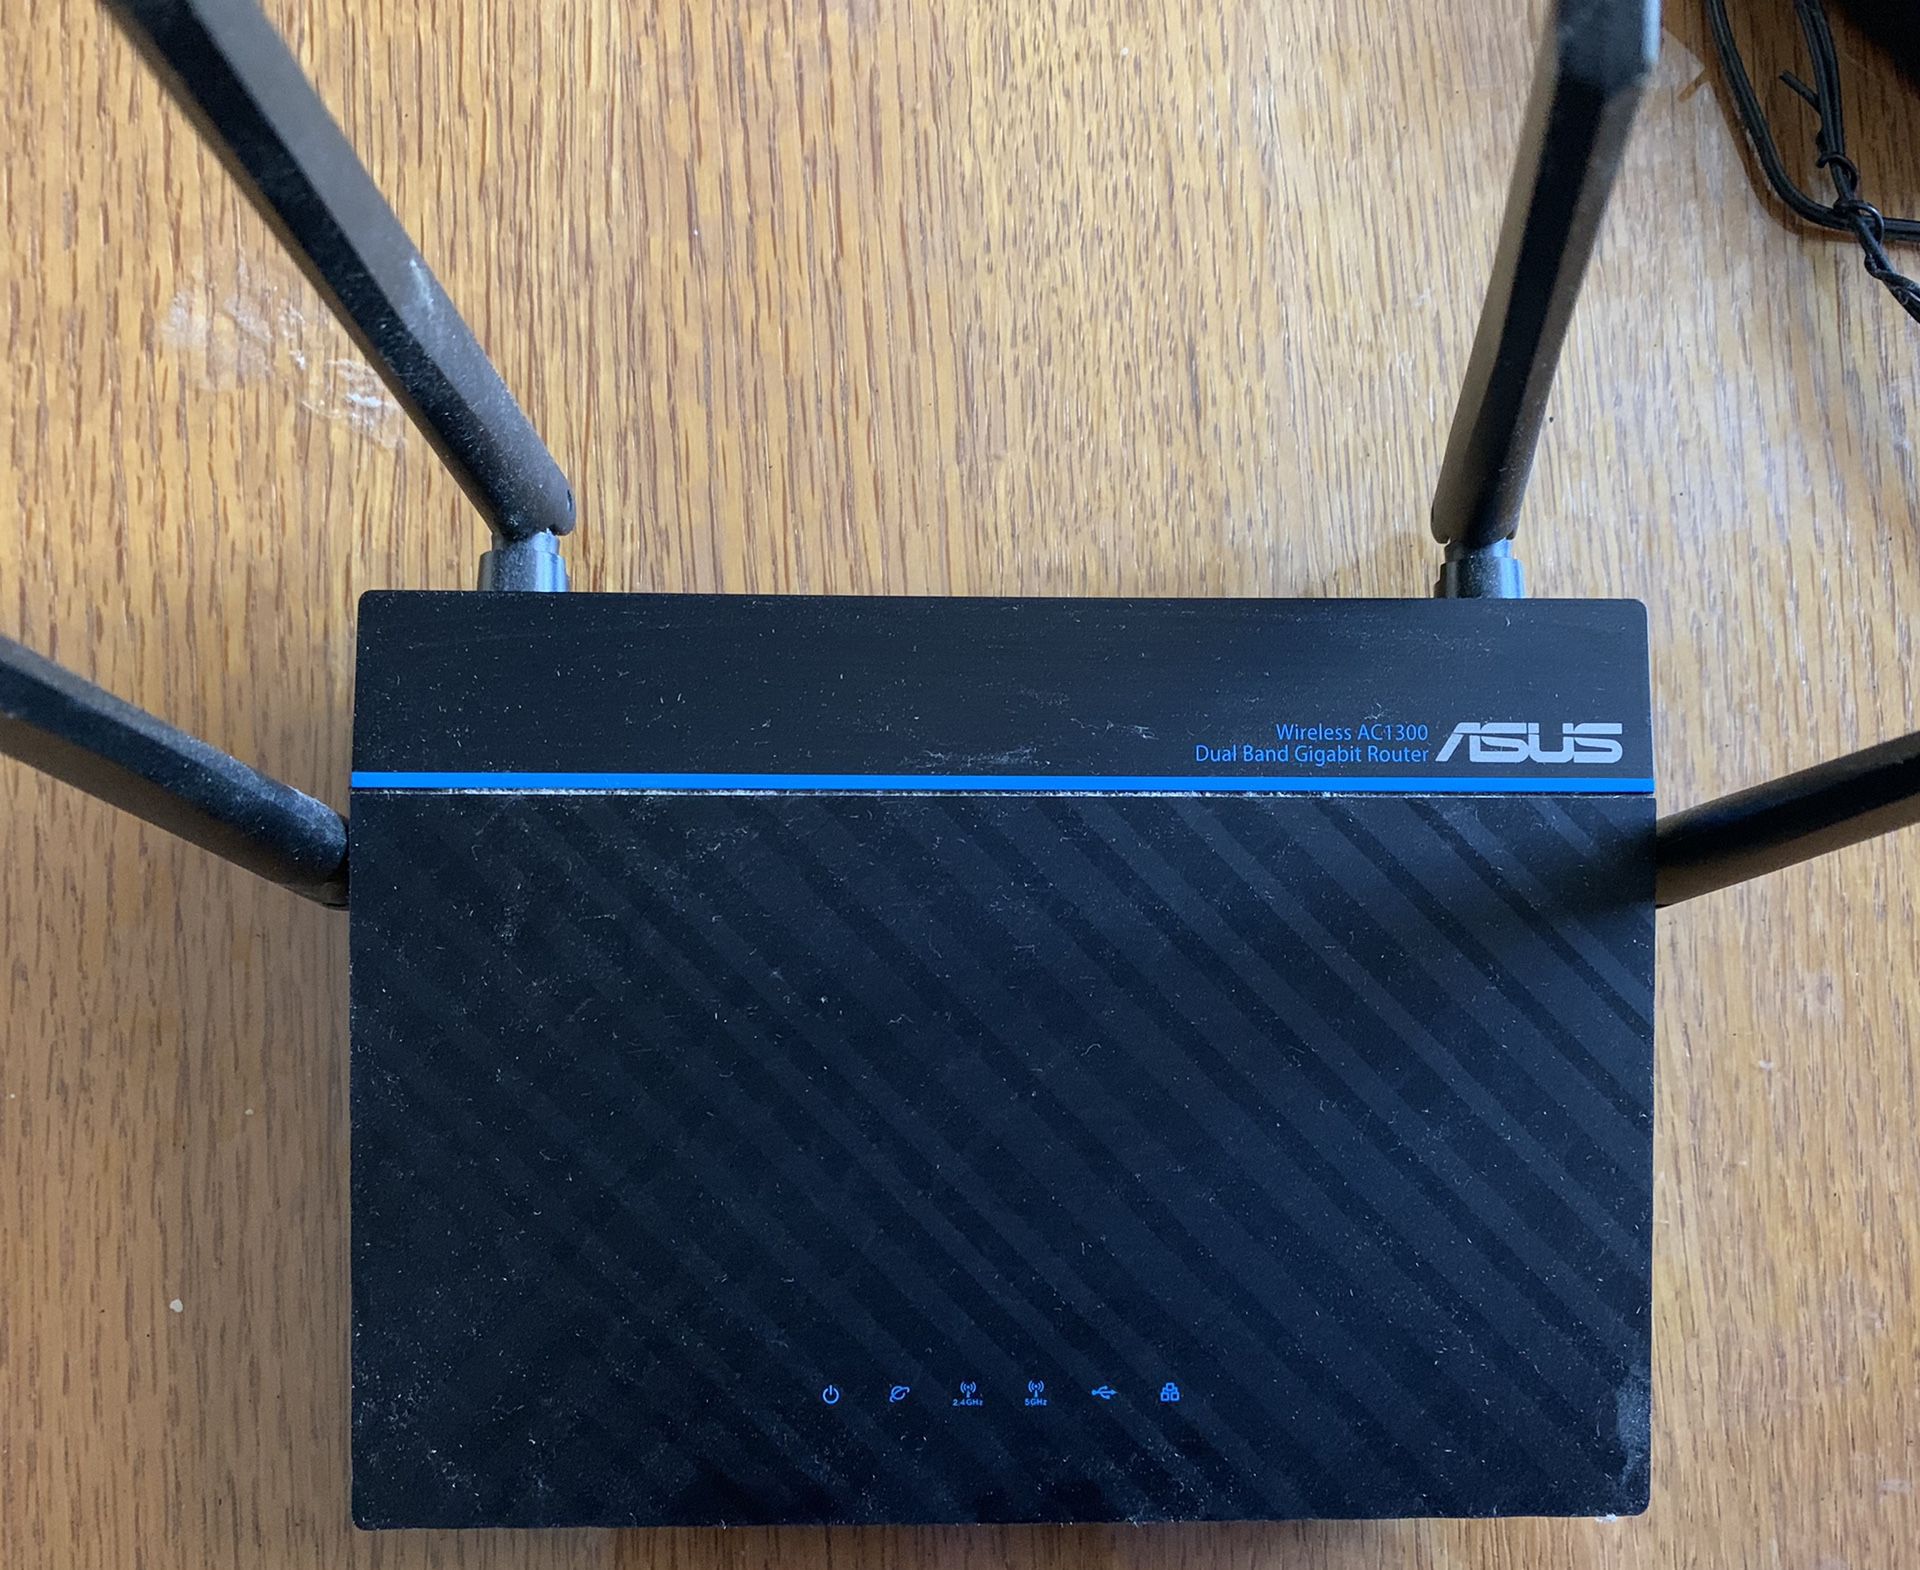 ASUS wireless AC1300 Dual Band Gigabit Router